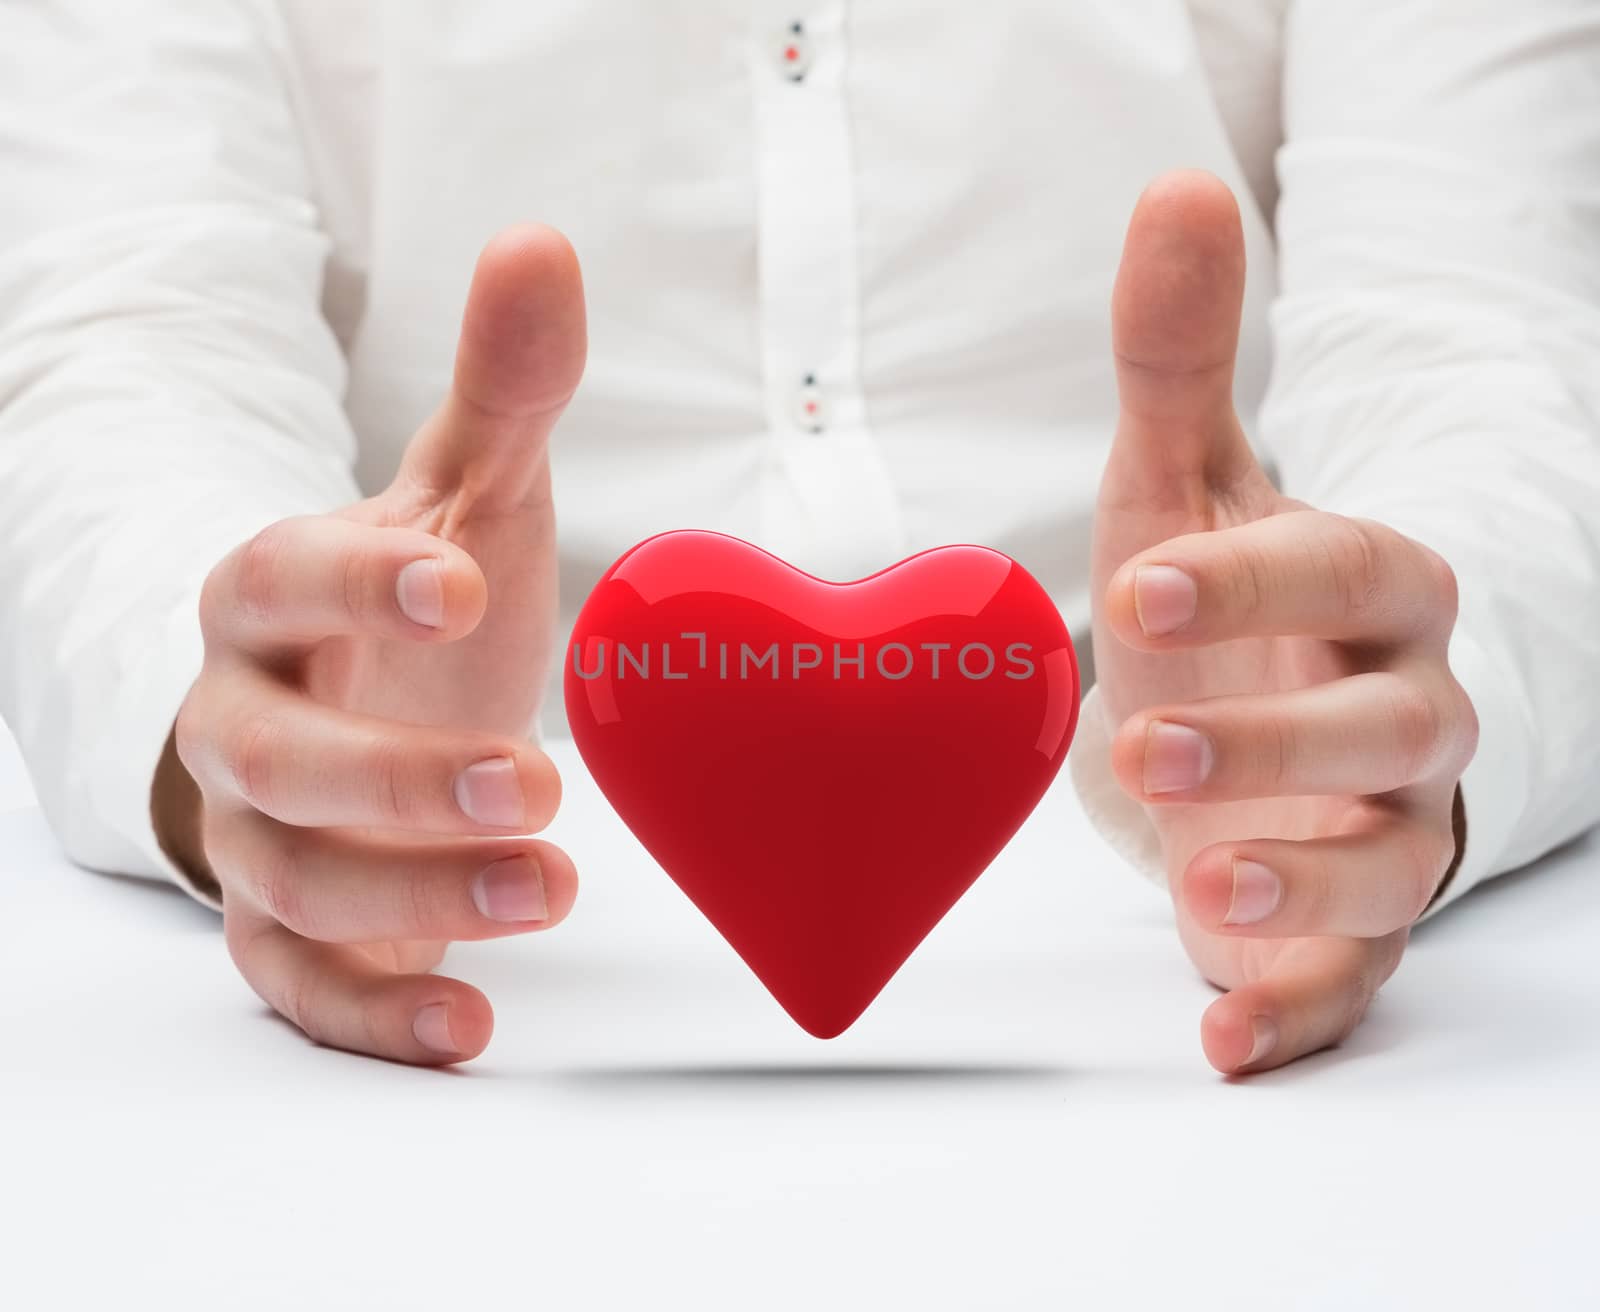 Hands holding against white background with vignette